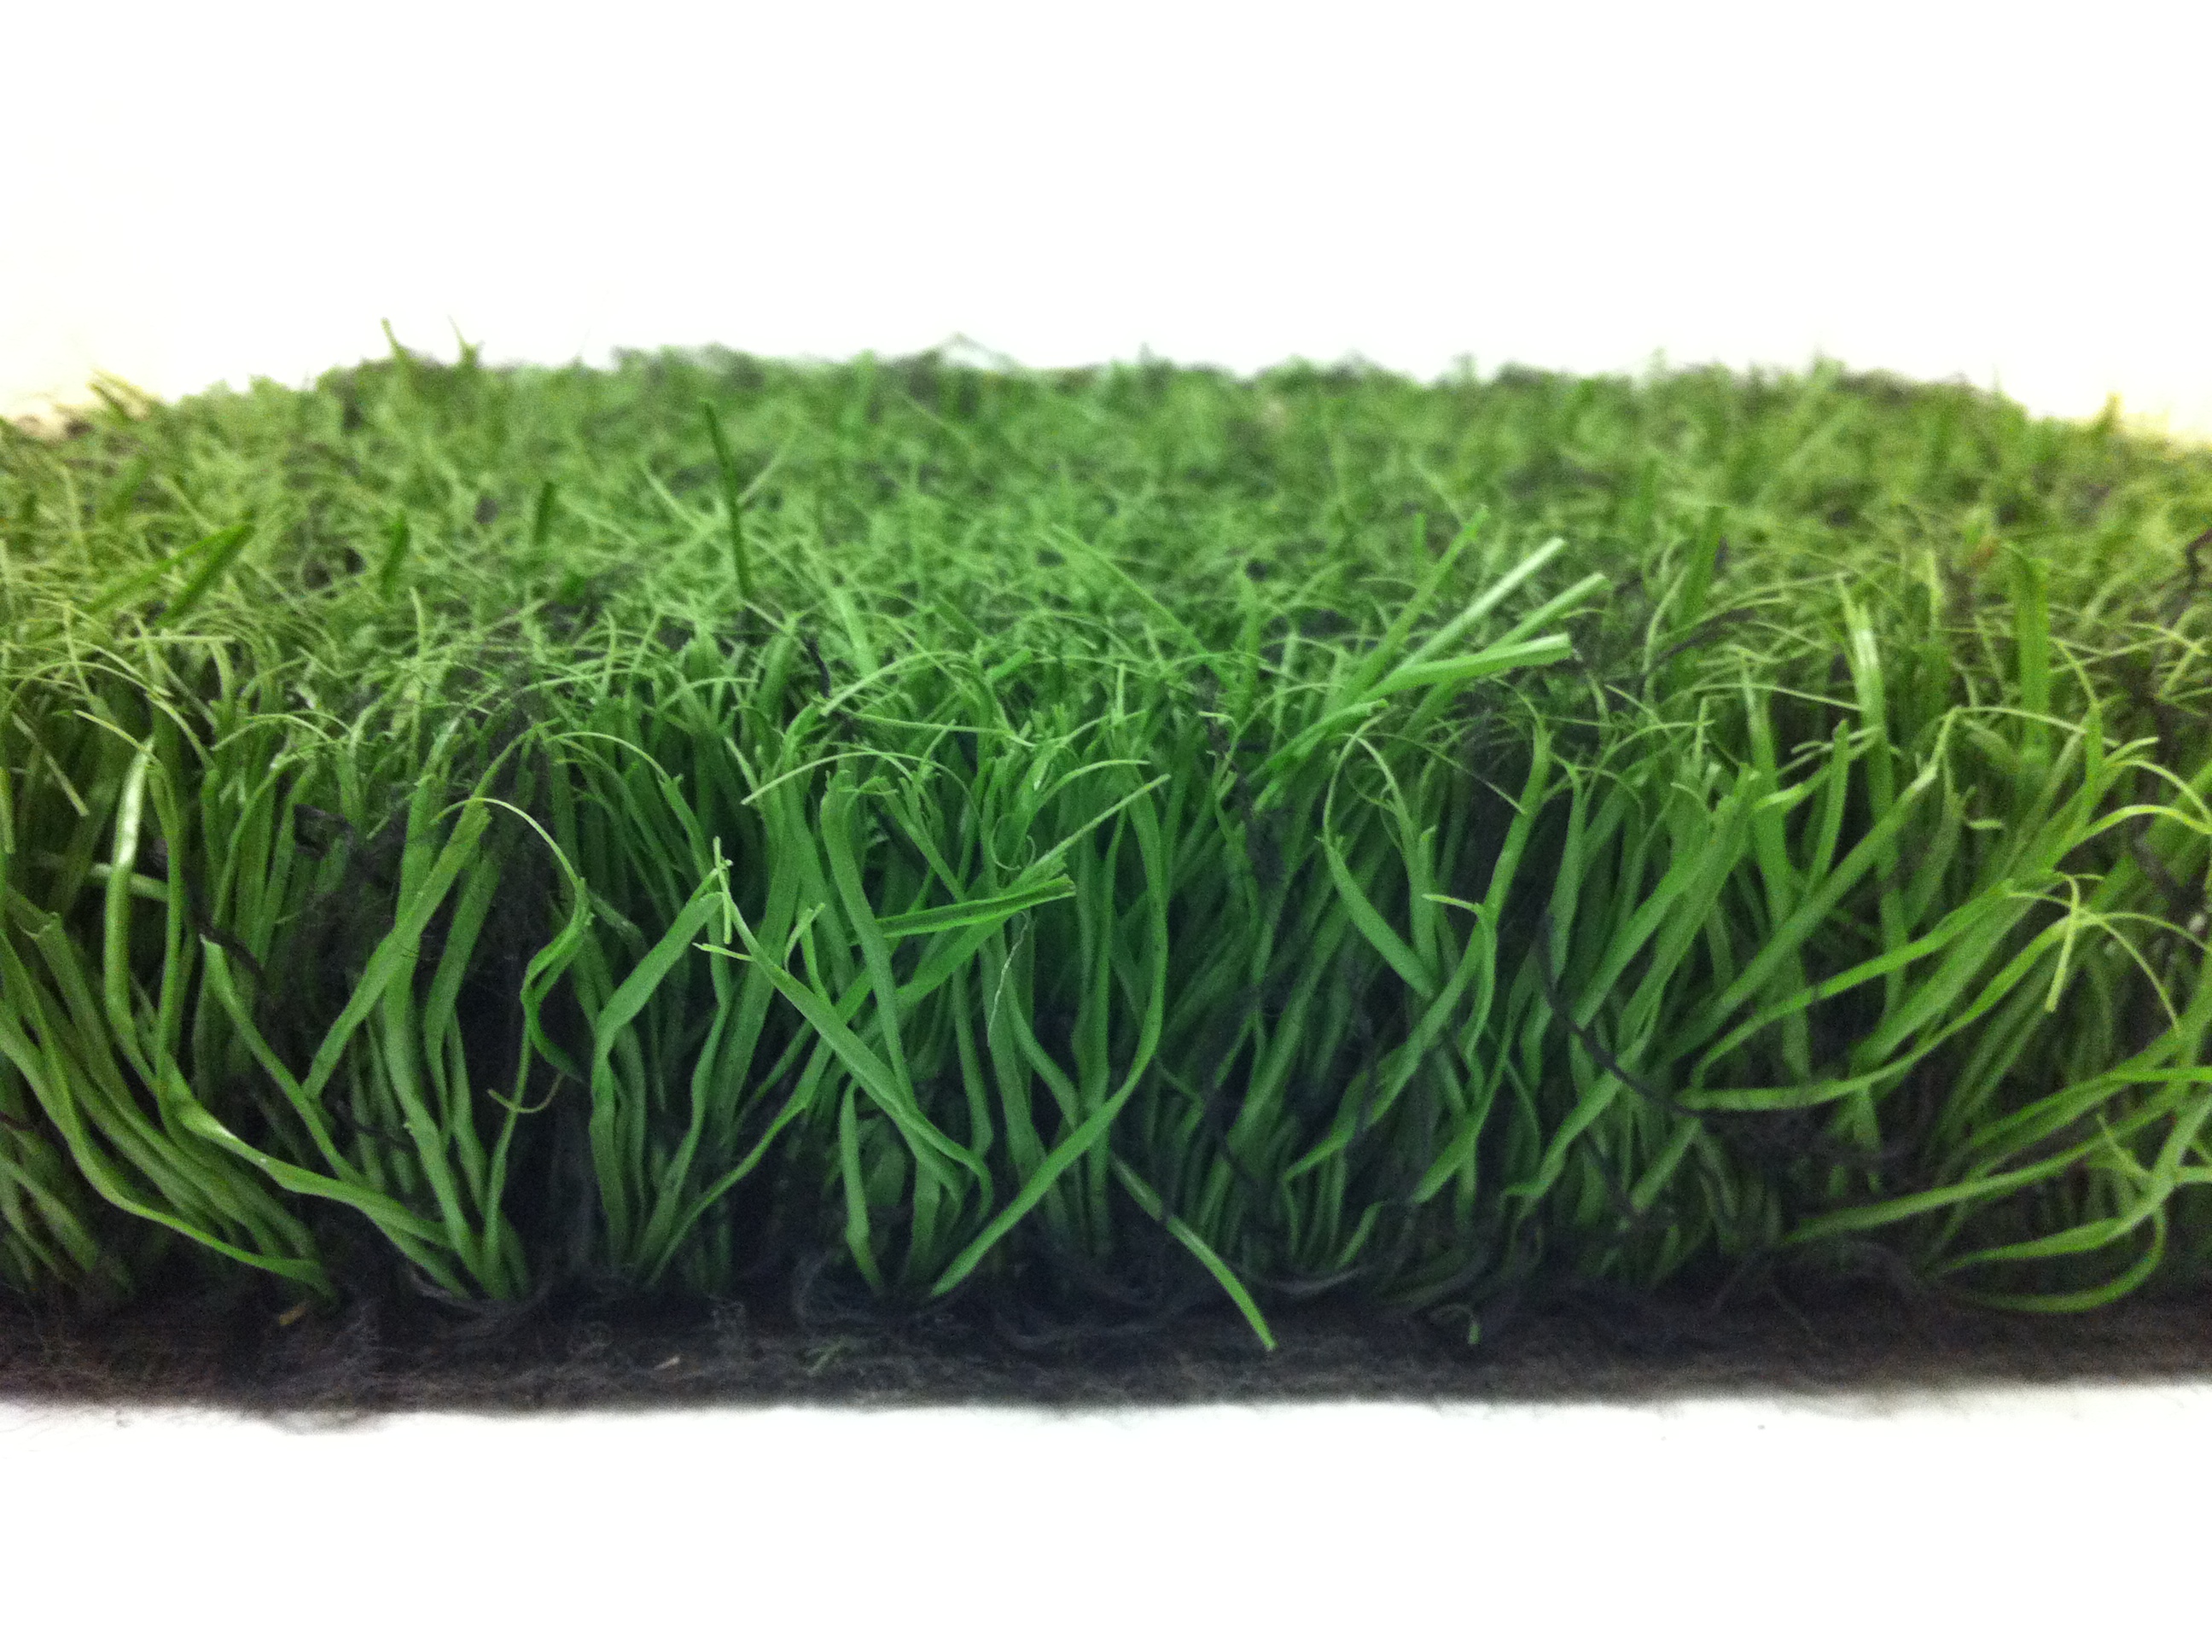 Turf Meaning and Definition